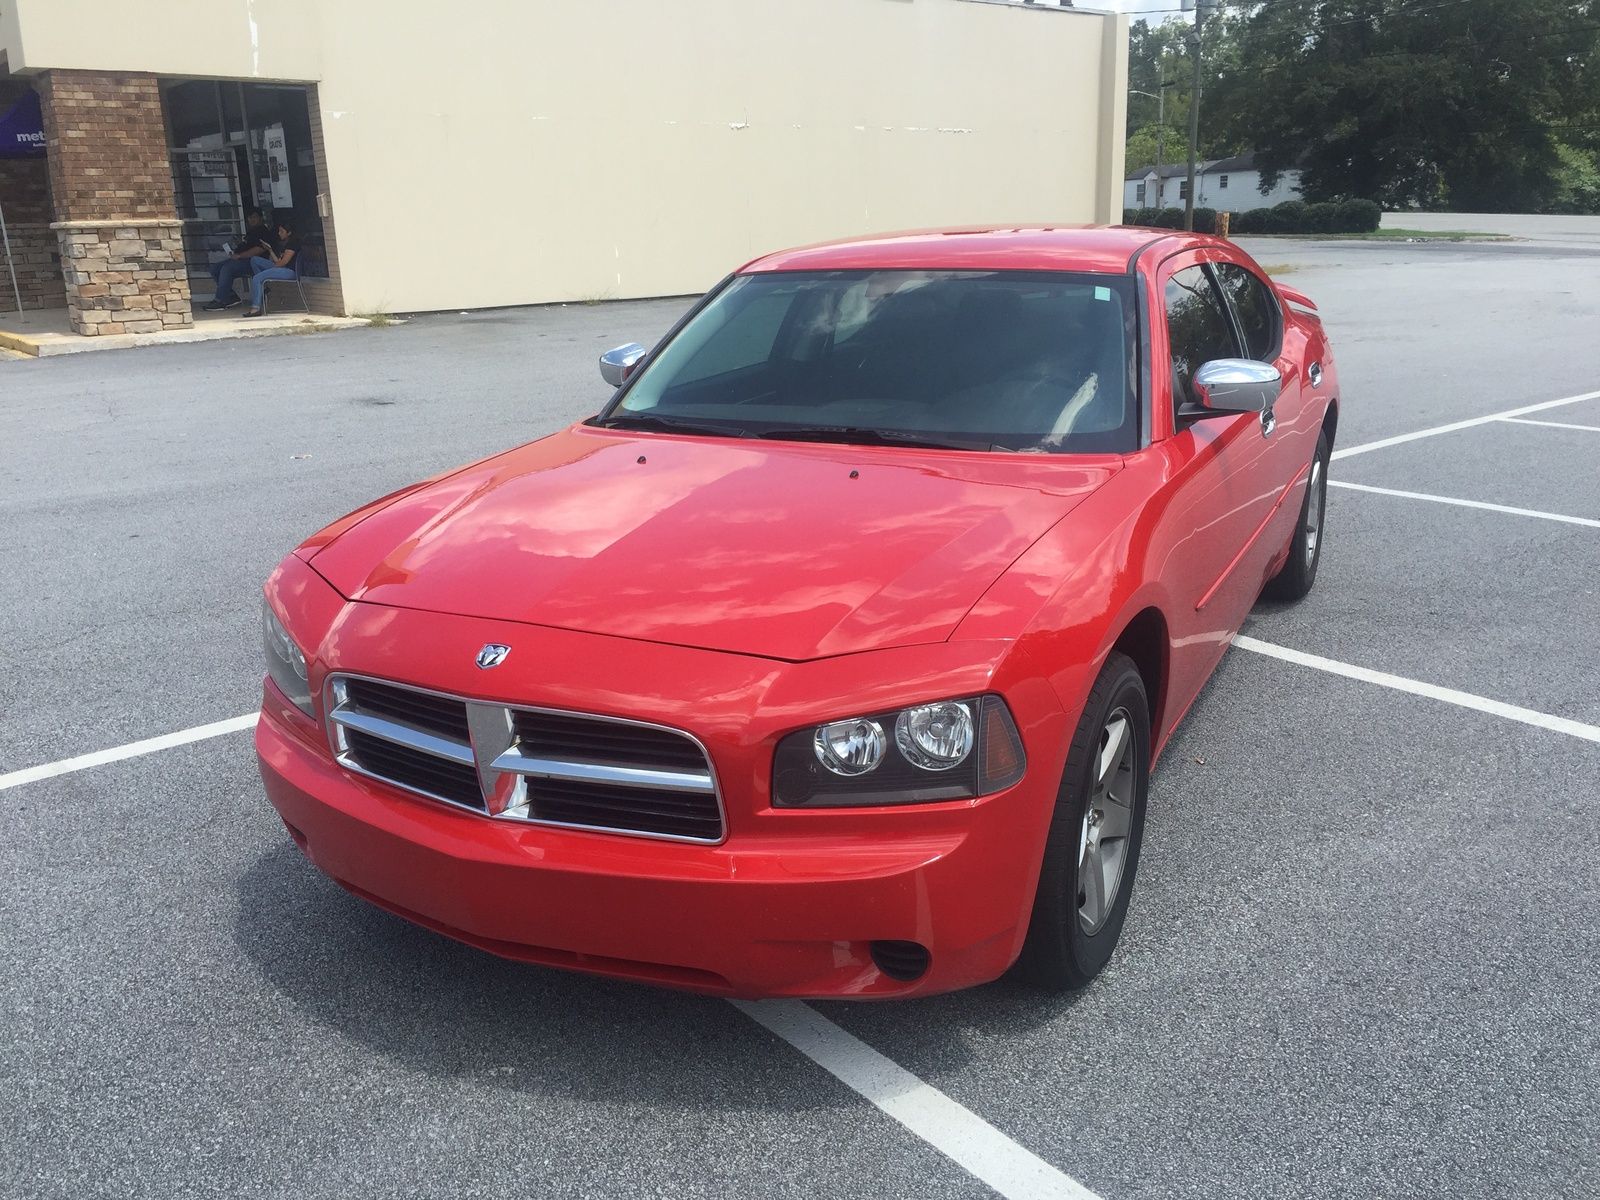 2009 Dodge Charger: The perfect project car.